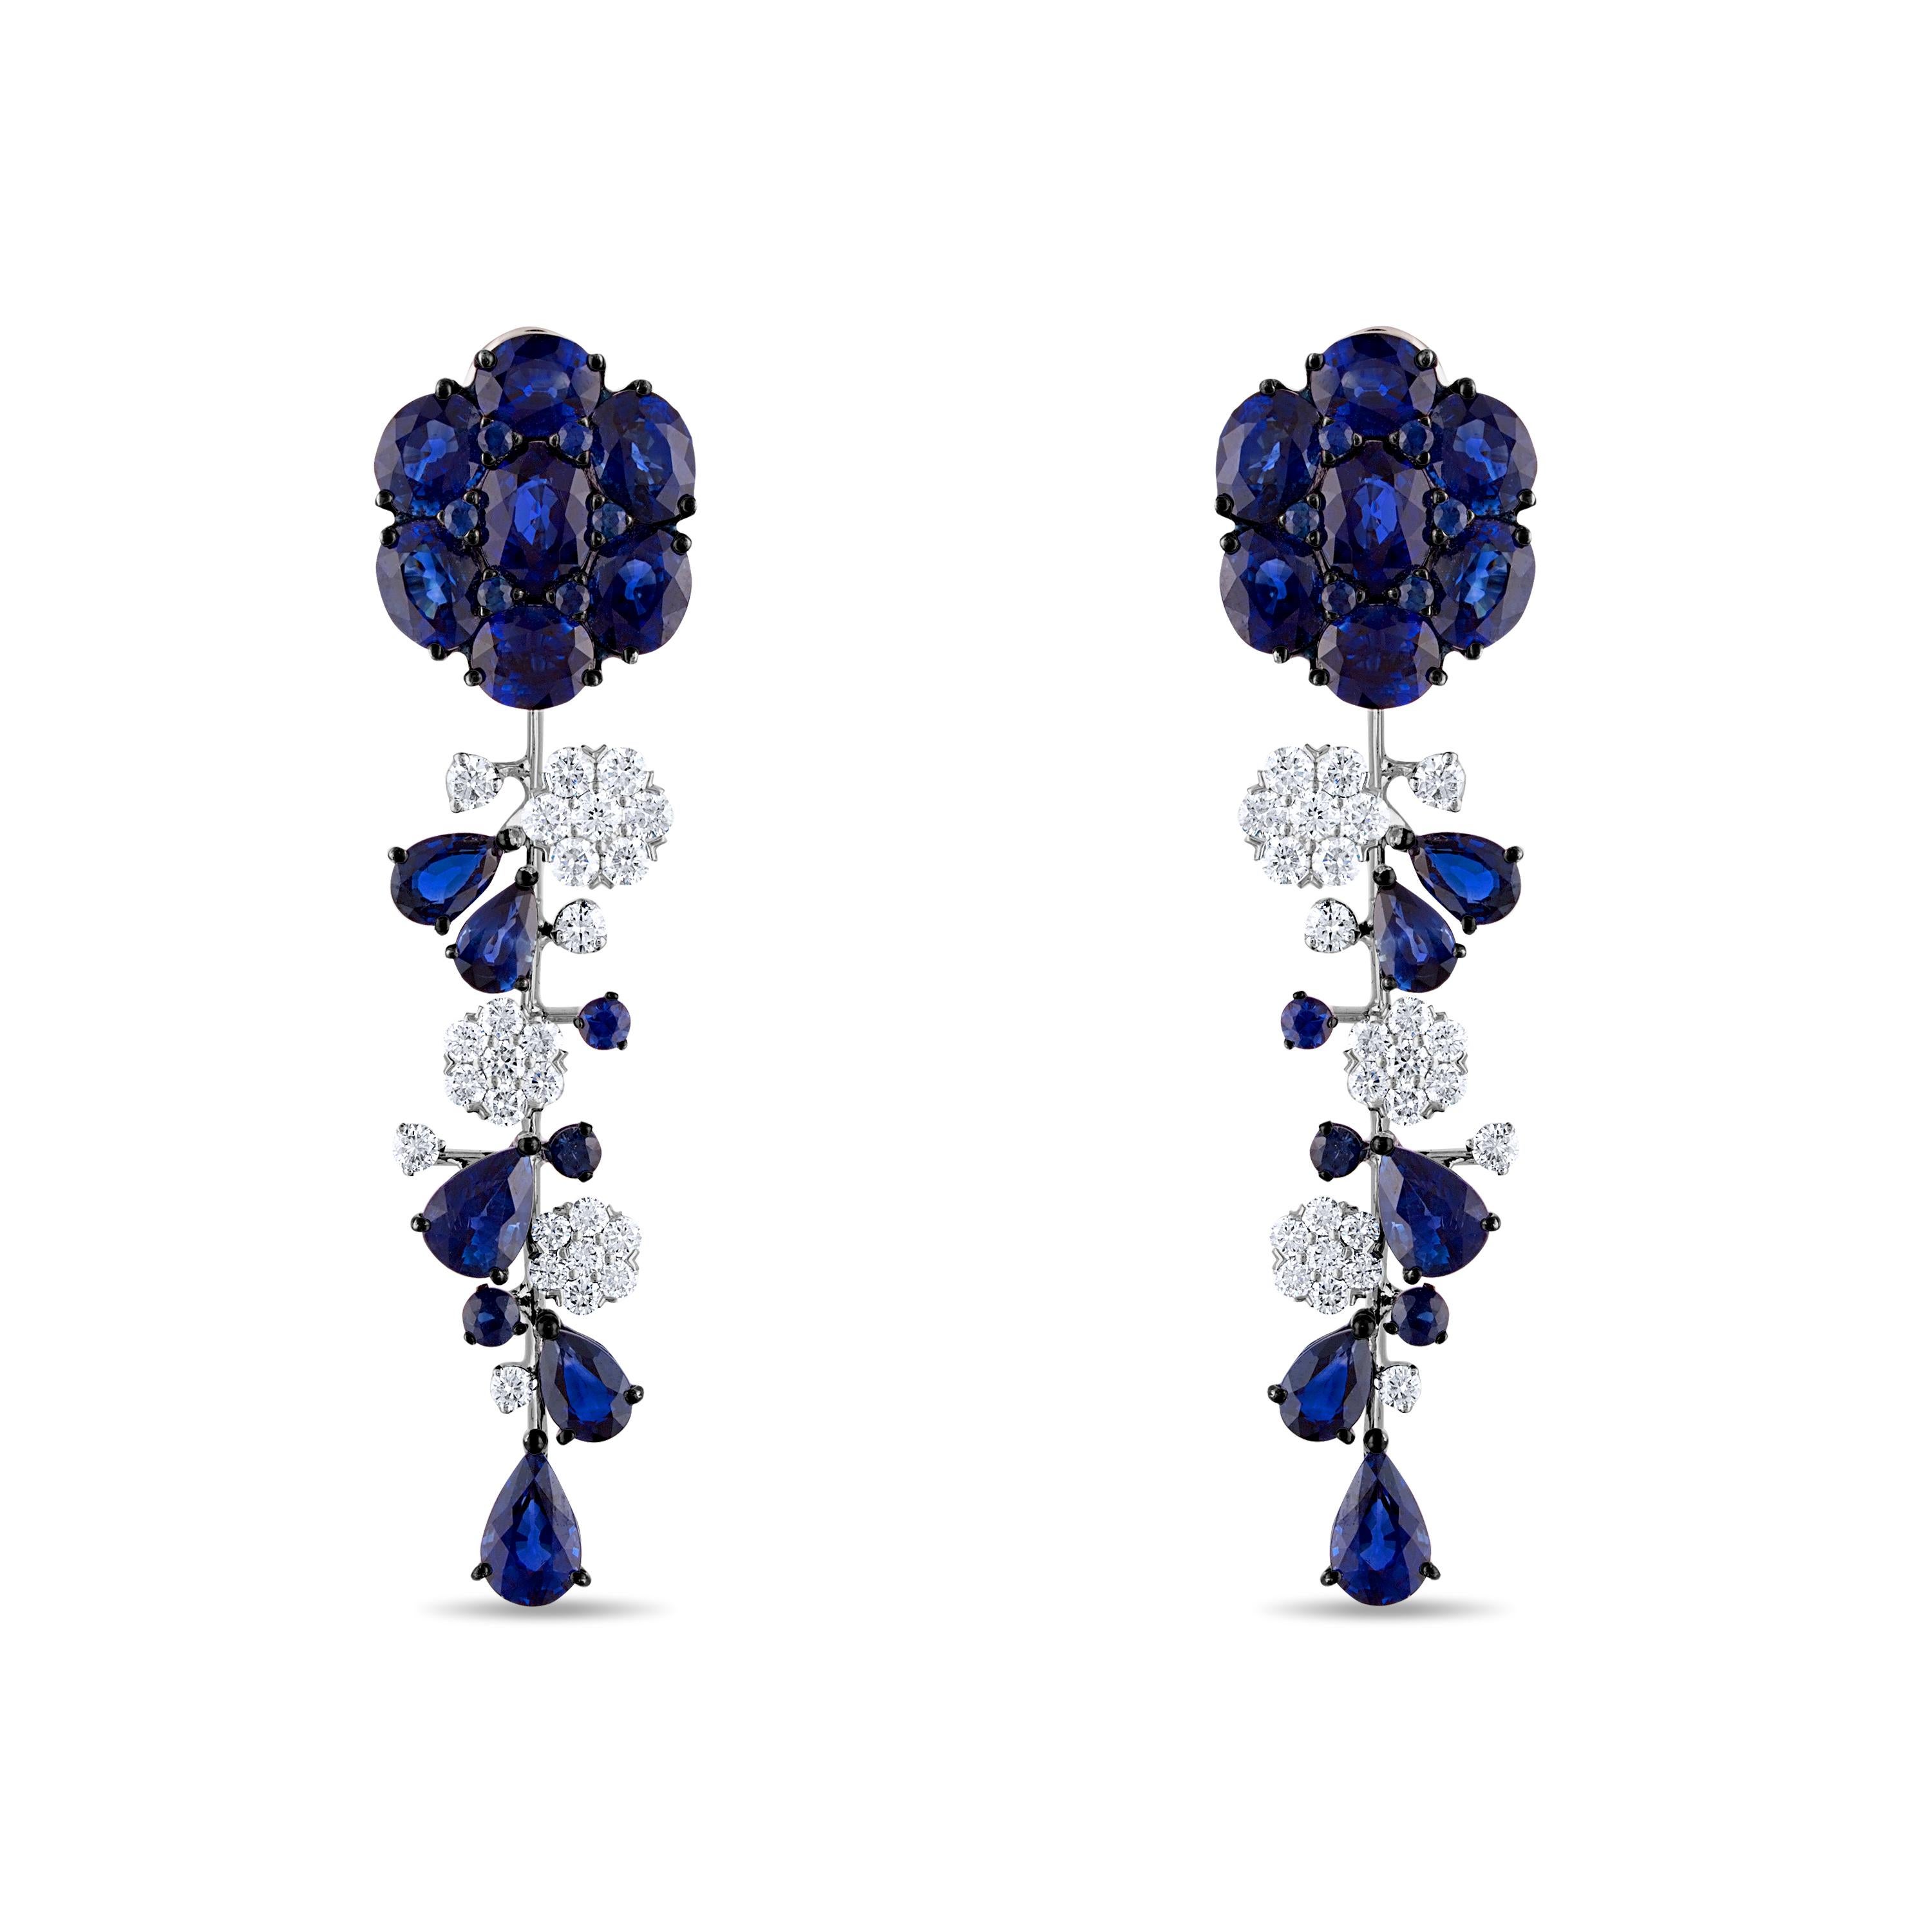 16.93 Carat Natural Royal Blue Sapphire and White Diamond Cascade Gold Earrings:

A gorgeous pair of earrings, it features numerous natural oval and pear-cut 